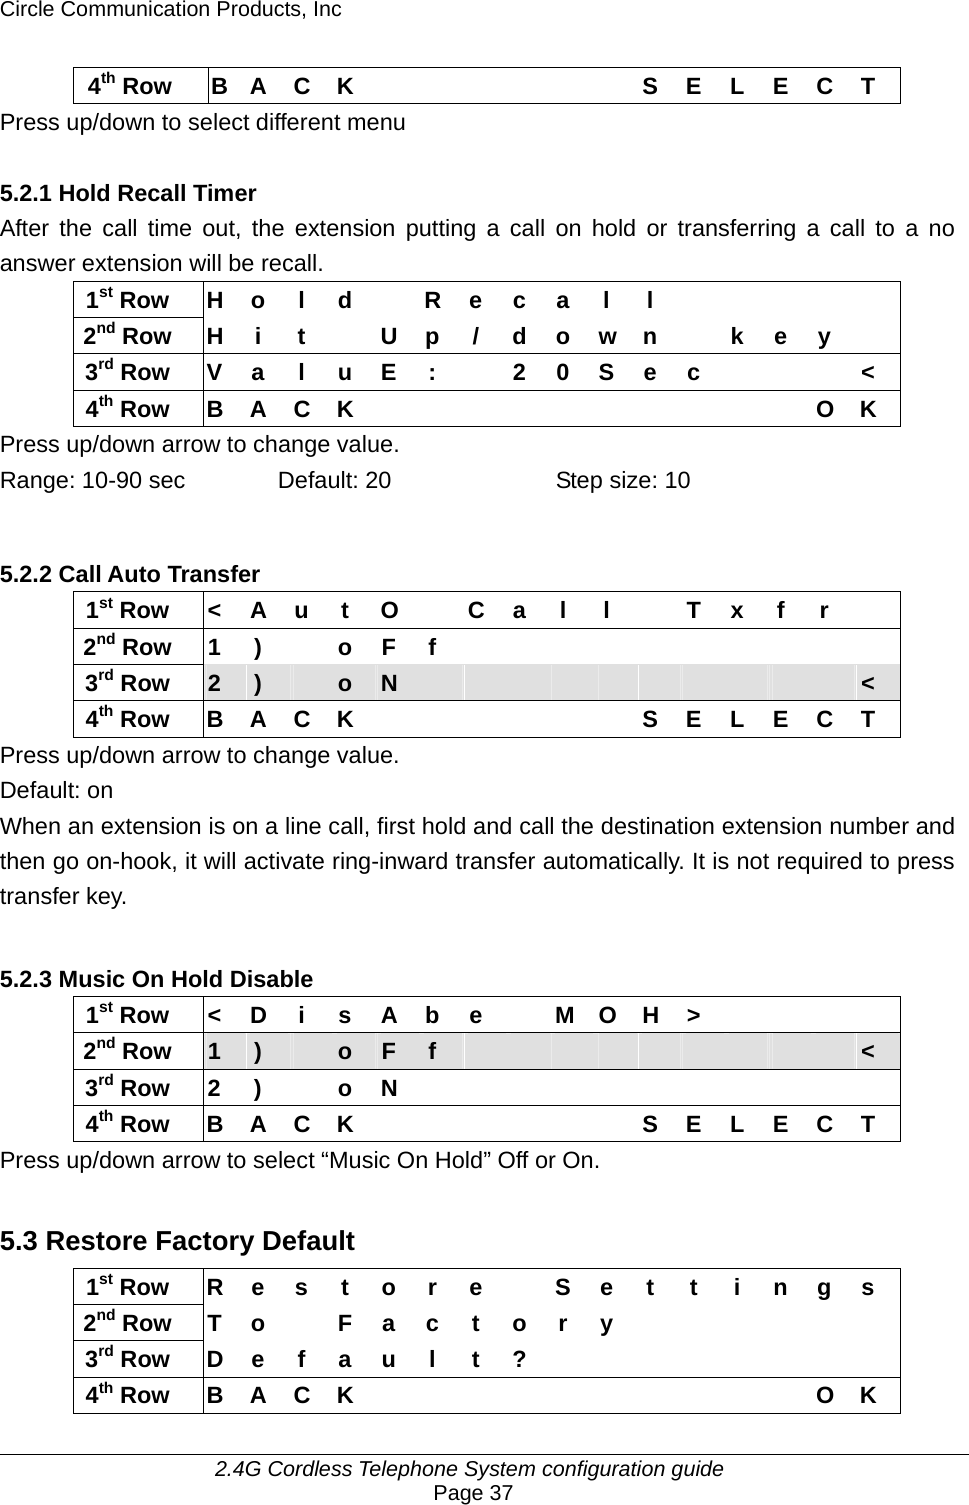 Circle Communication Products, Inc     2.4G Cordless Telephone System configuration guide Page 37 4th Row B A C K       S E L E C T Press up/down to select different menu  5.2.1 Hold Recall Timer After the call time out, the extension putting a call on hold or transferring a call to a no answer extension will be recall. 1st Row H o l d  R e c a l l          2nd Row H i t   U p / d o w n  k e y   3rd Row V a l u E :  2 0 S e c    &lt; 4th Row B A C K           O K Press up/down arrow to change value. Range: 10-90 sec  Default: 20  Step size: 10  5.2.2 Call Auto Transfer   1st Row  &lt;  A  u  t  O    C  a  l  l    T  x  f  r   2nd Row 1 )  o F f           3rd Row  2  )   o  N                      &lt; 4th Row B A C K       S E L E C T Press up/down arrow to change value. Default: on When an extension is on a line call, first hold and call the destination extension number and then go on-hook, it will activate ring-inward transfer automatically. It is not required to press transfer key.  5.2.3 Music On Hold Disable  1st Row &lt; D i s A b e  M O H &gt;     2nd Row  1  )   o  F  f                    &lt; 3rd Row 2 )  o N            4th Row B A C K       S E L E C T Press up/down arrow to select “Music On Hold” Off or On.  5.3 Restore Factory Default 1st Row  R e s t o r e  S e t t i n g s 2nd Row T o  F a c t o r y            3rd Row D e f a u l t ?                4th Row B A C K           O K 